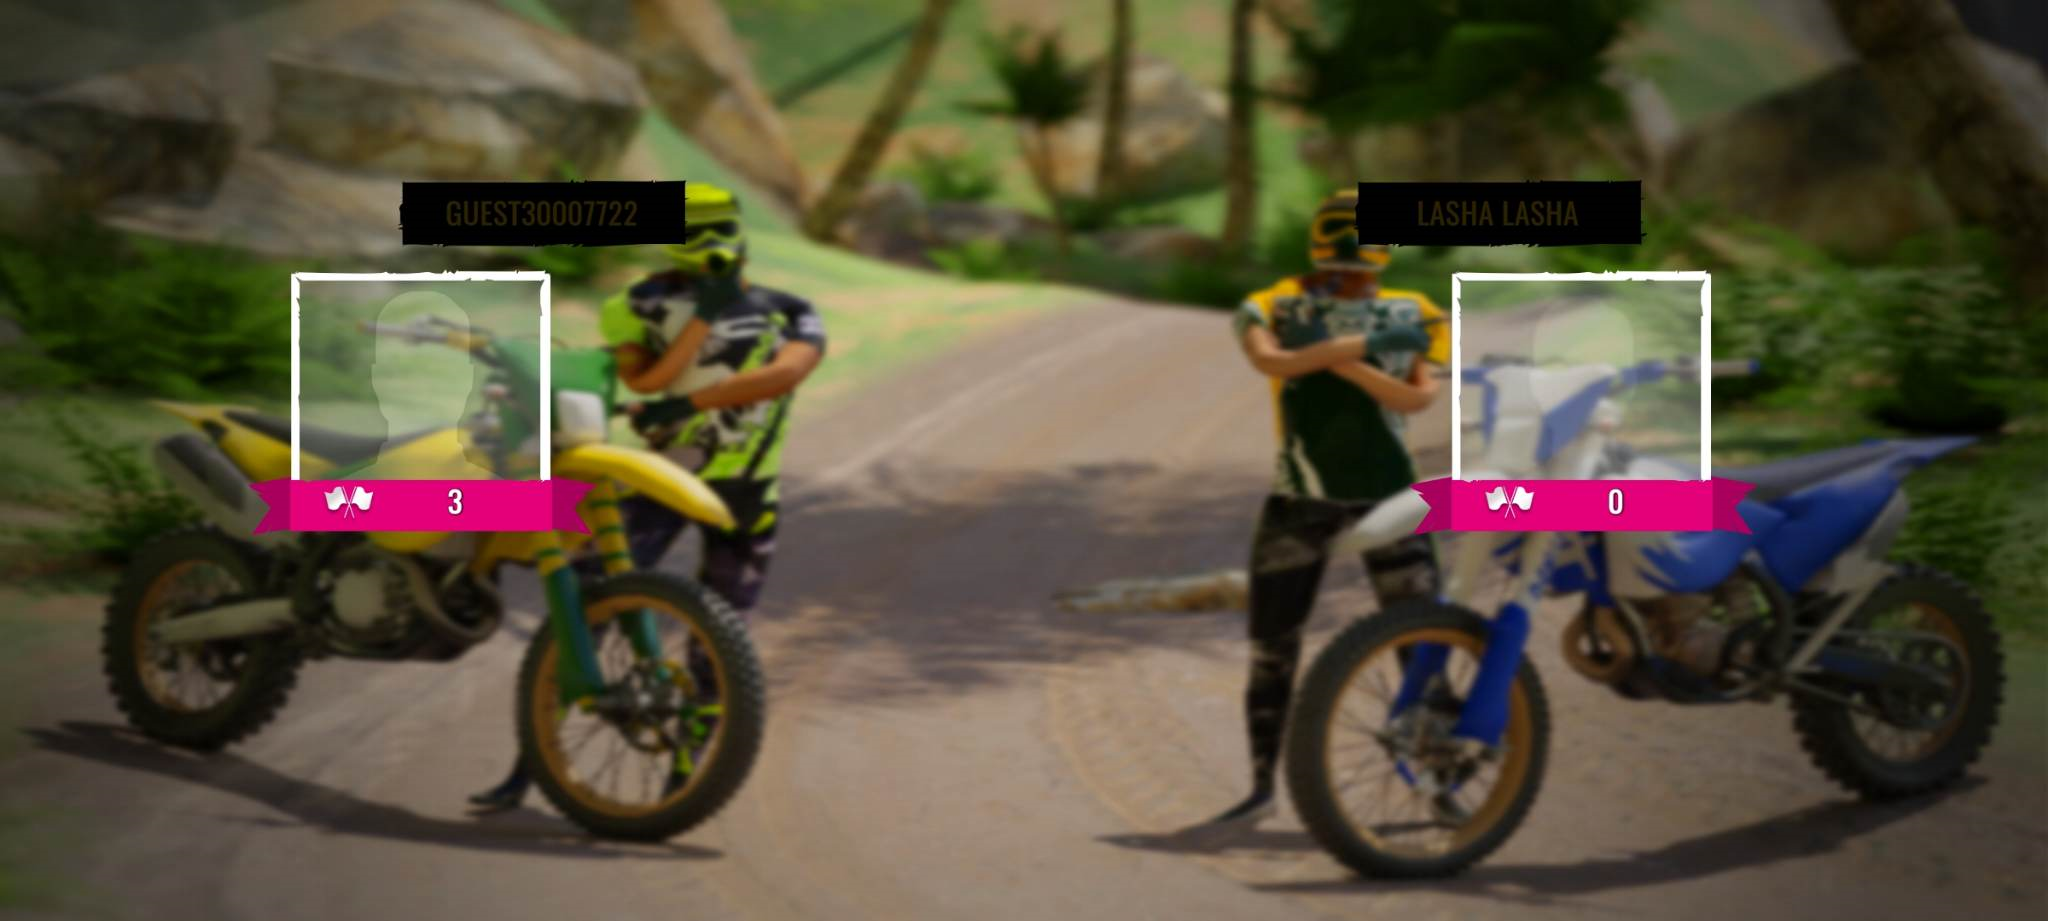 A game for people that like Dirt Bikes, good selection but.. It lacks something